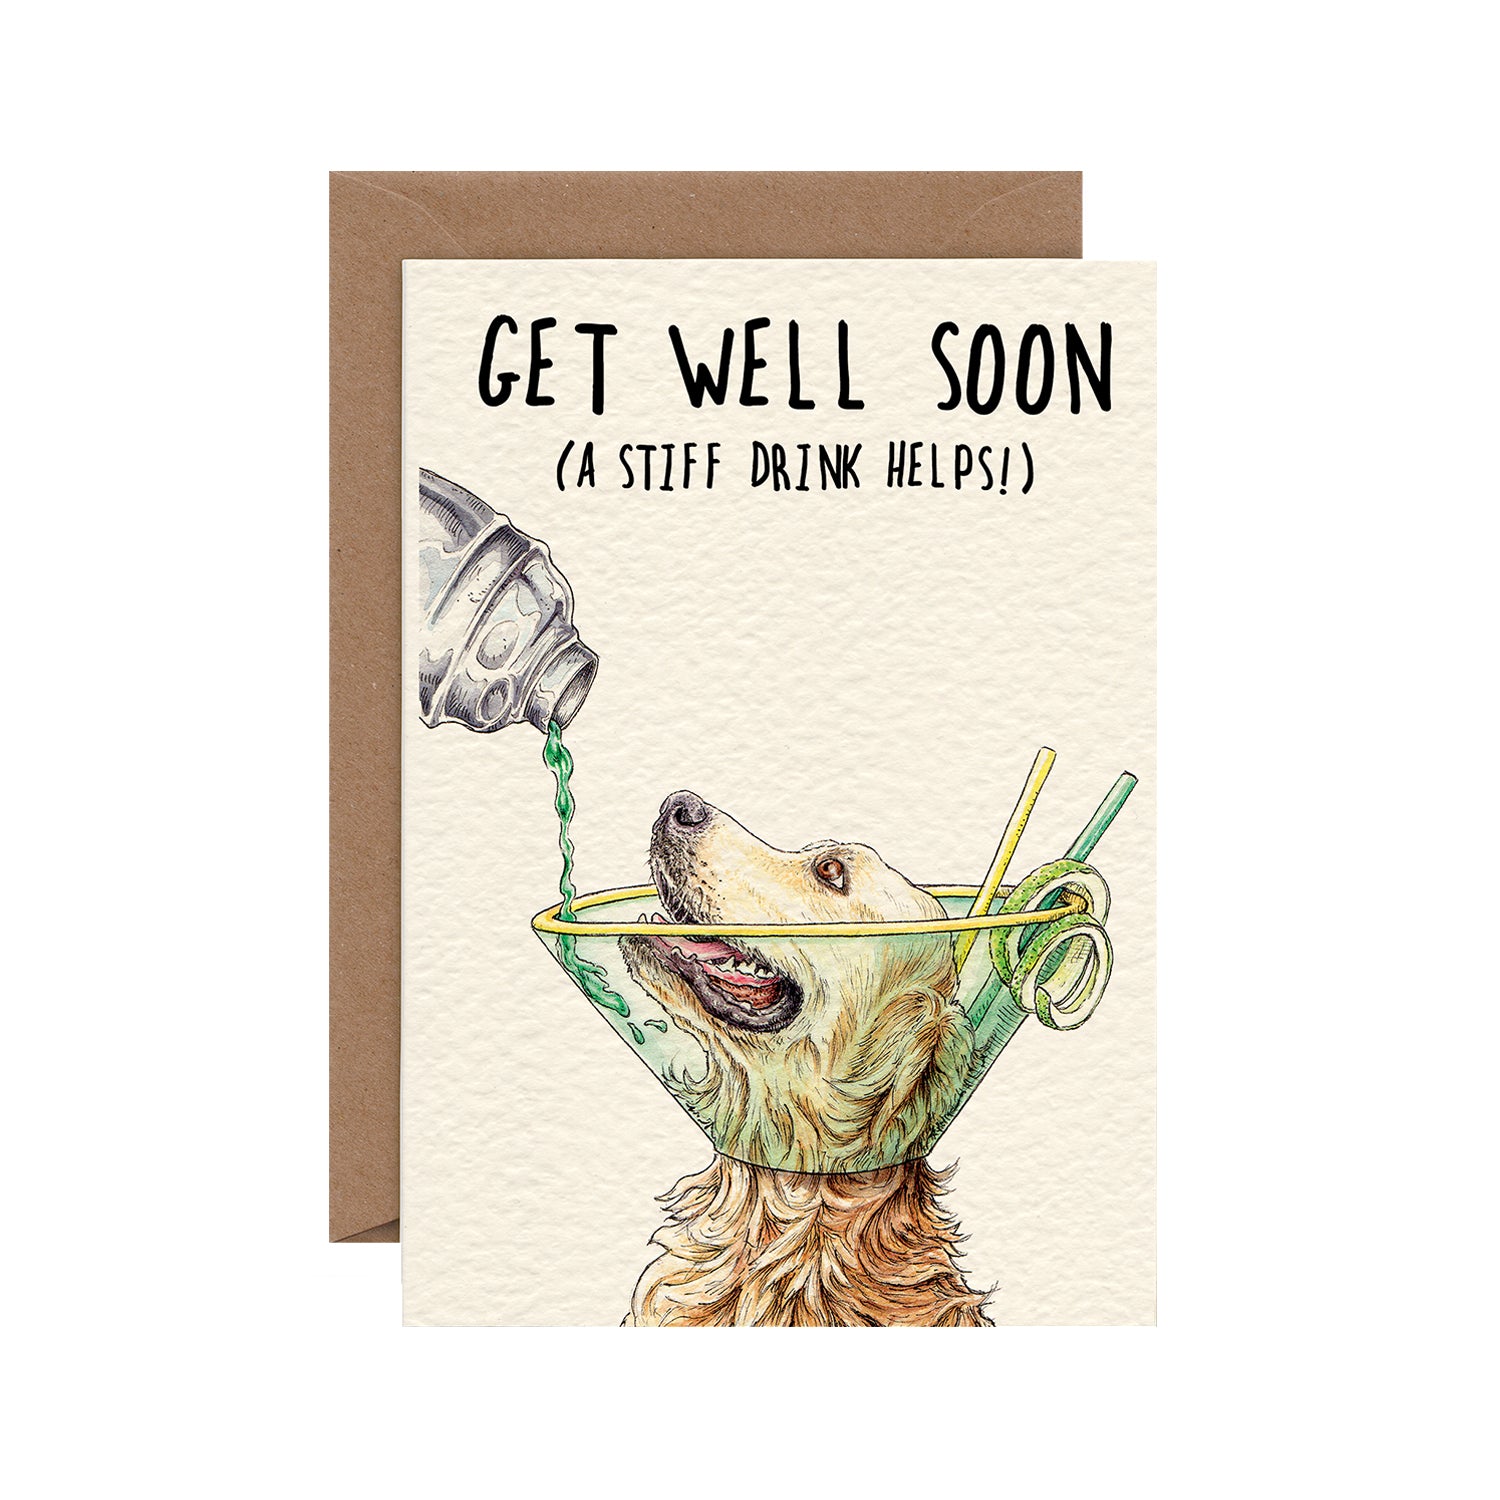 A Hester &amp; Cook Get Well Soon Dog Card with an image of a dog enjoying a stiff drink from a martini glass.